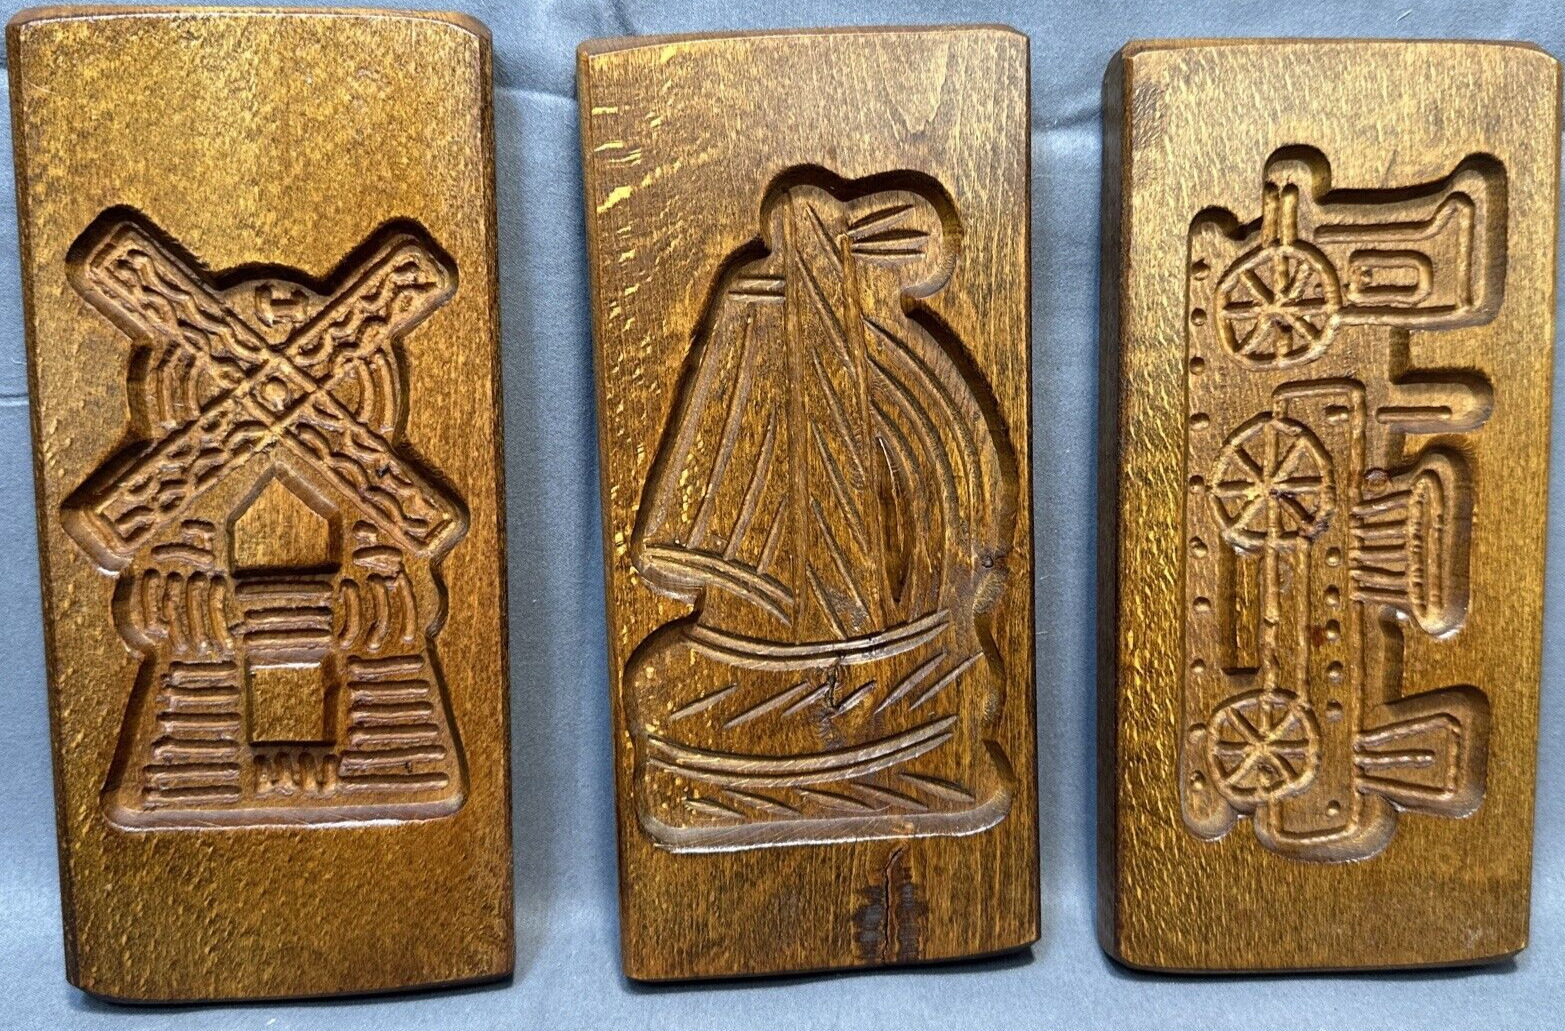 7 ” Dutch Springerle Speculaas Wood Cookie Molds. Train, Sail, Wind LOT OF 3